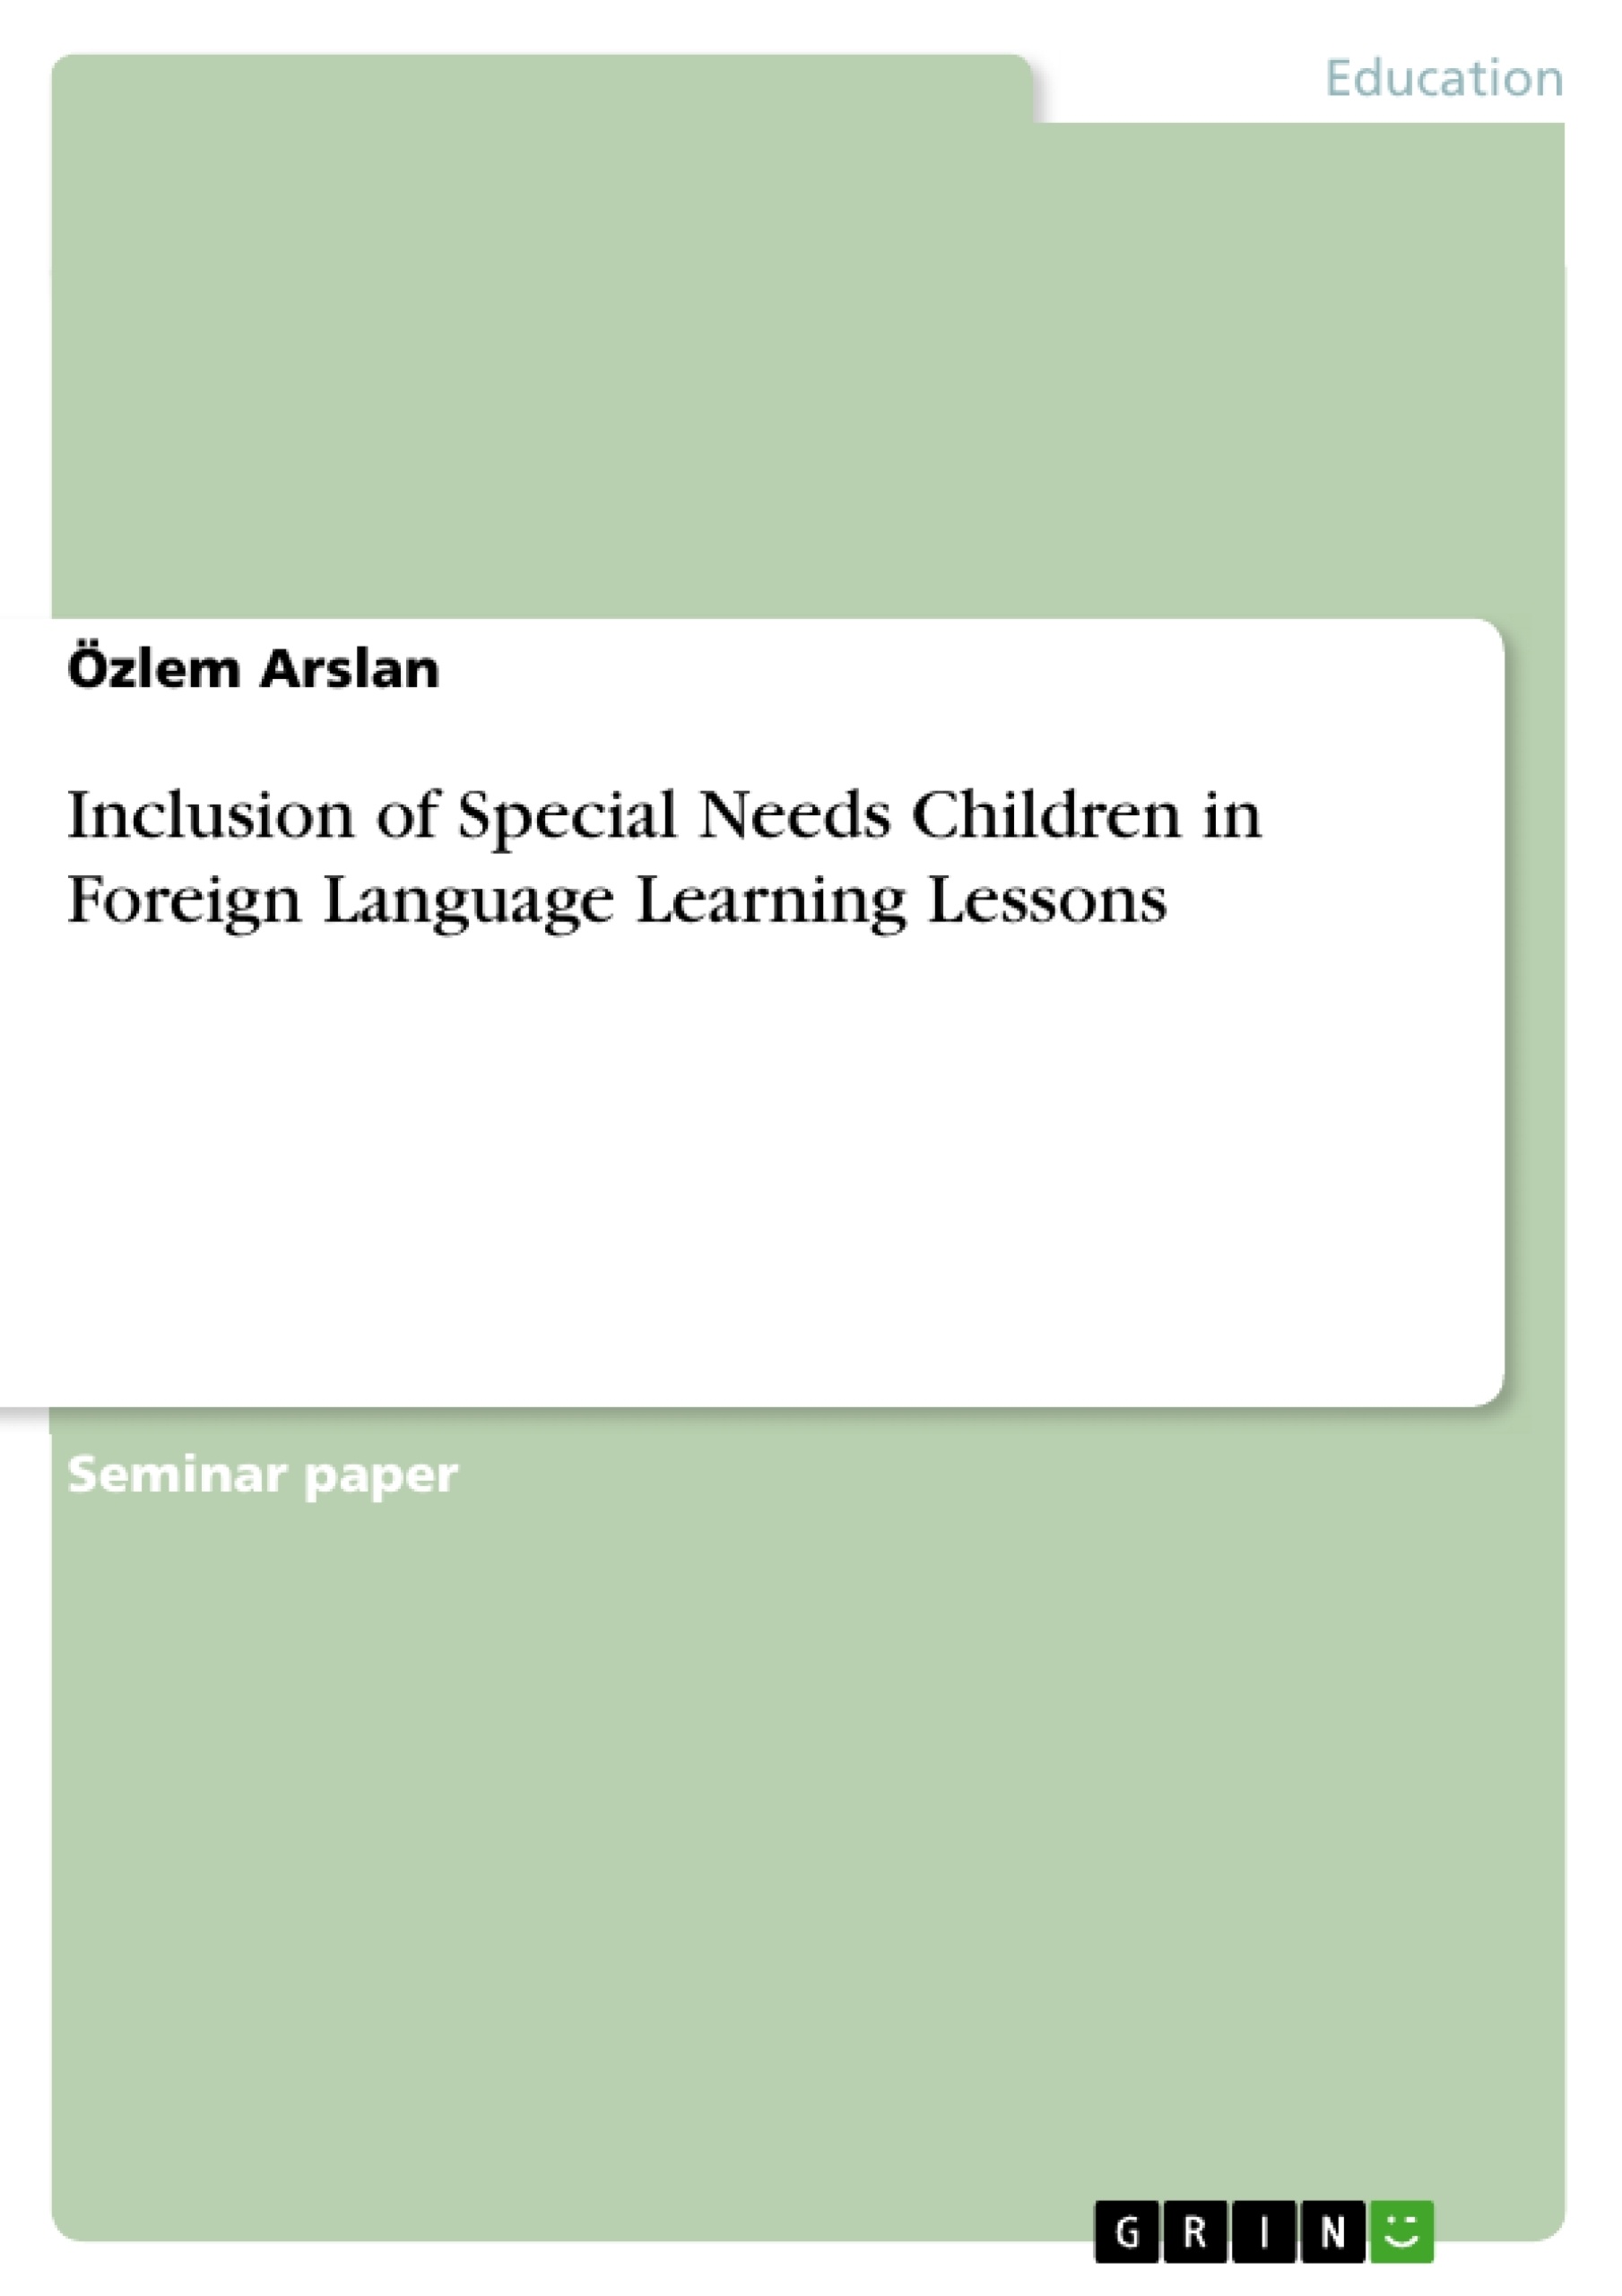 Titel: Inclusion of Special Needs Children in Foreign Language Learning Lessons